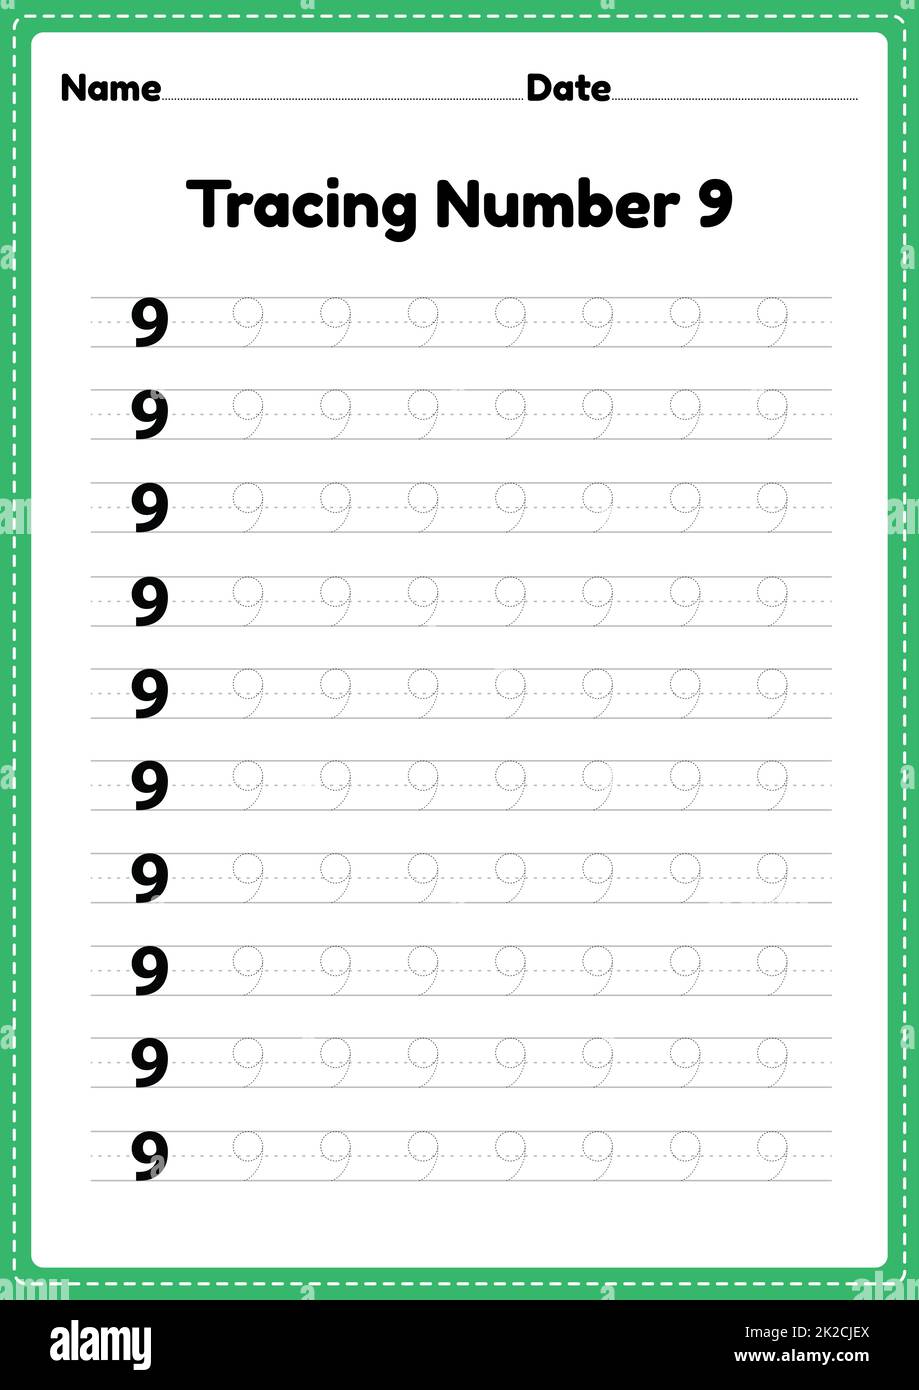 Tracing number 9 worksheet for kindergarten and preschool kids for educational handwriting practice in a printable page. Stock Photo